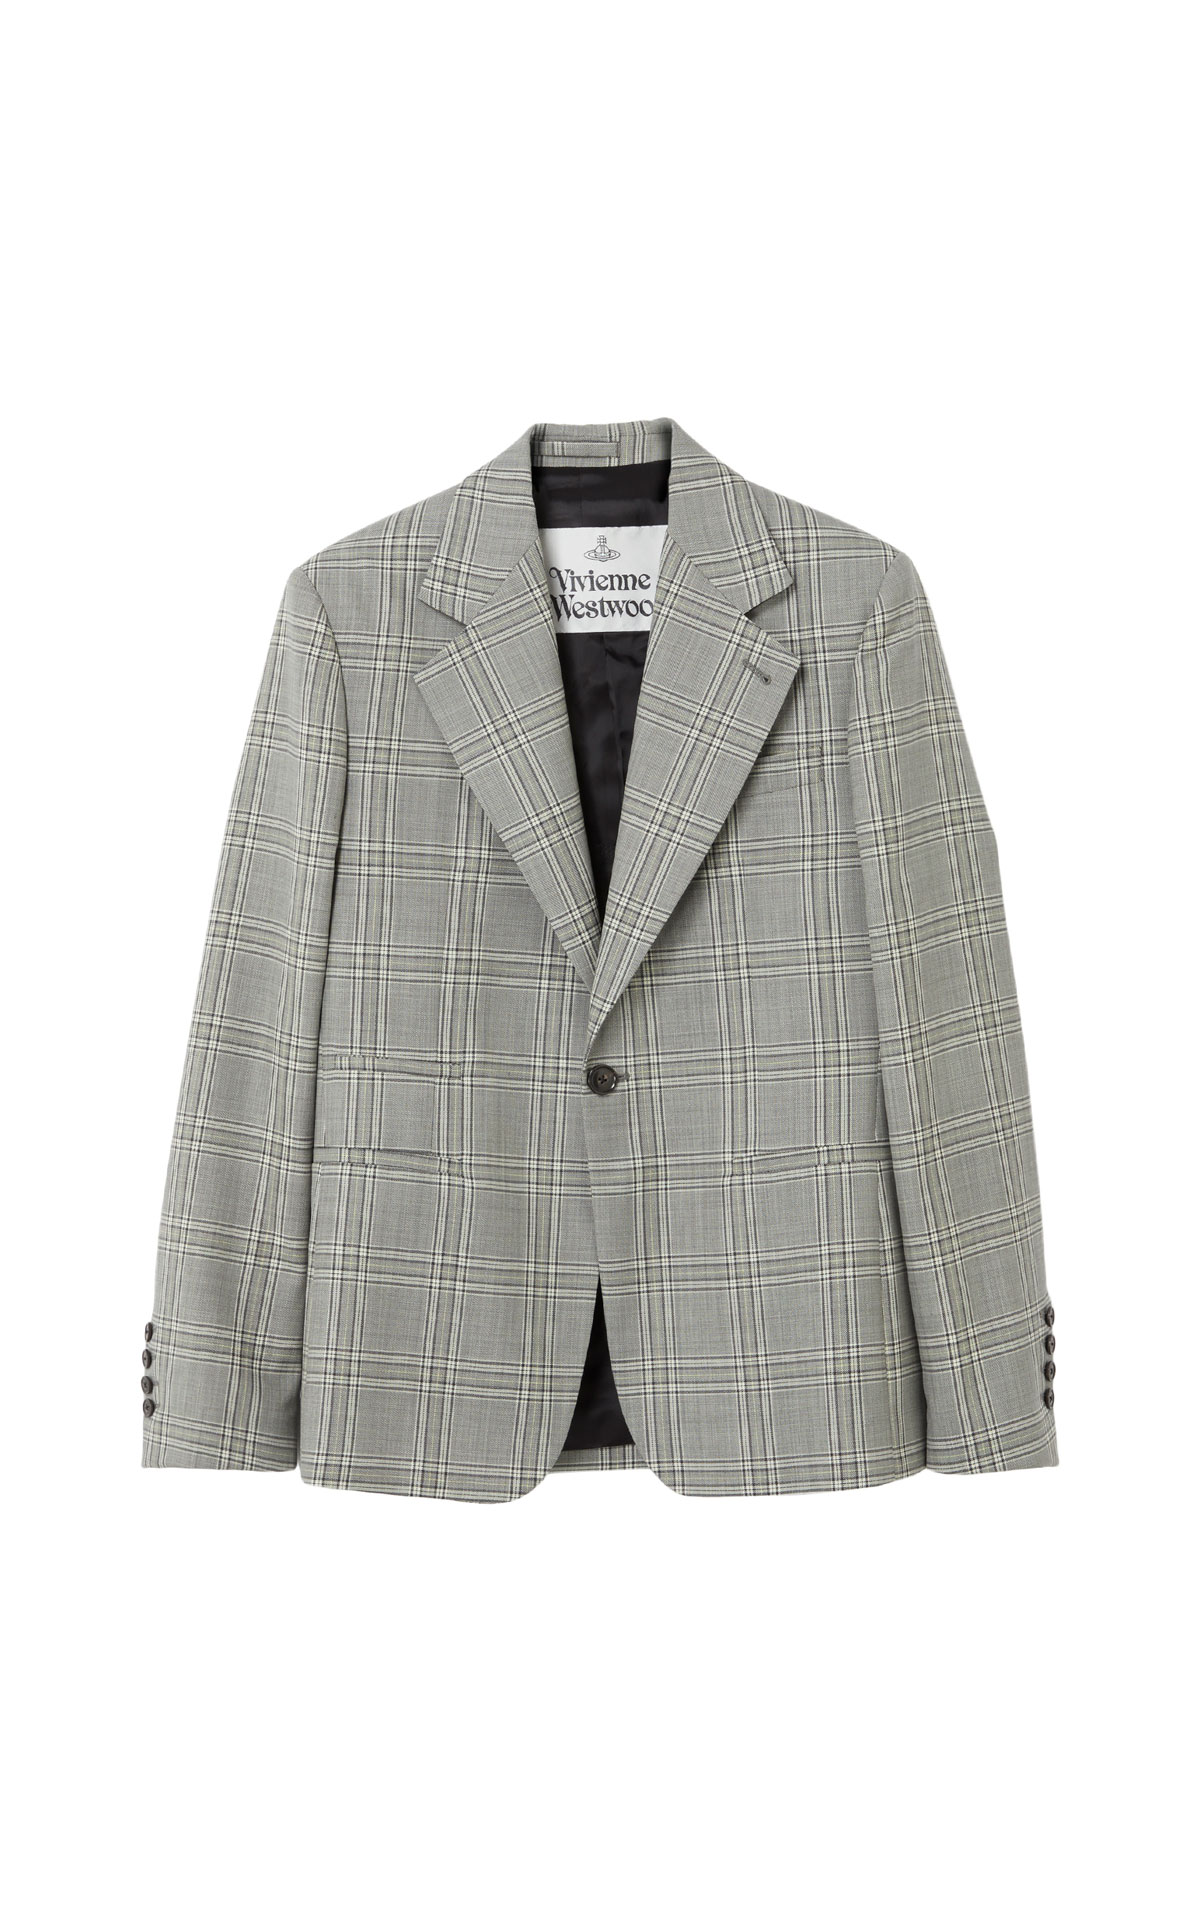 Vivienne Westwood Classic jacket grey from Bicester Village